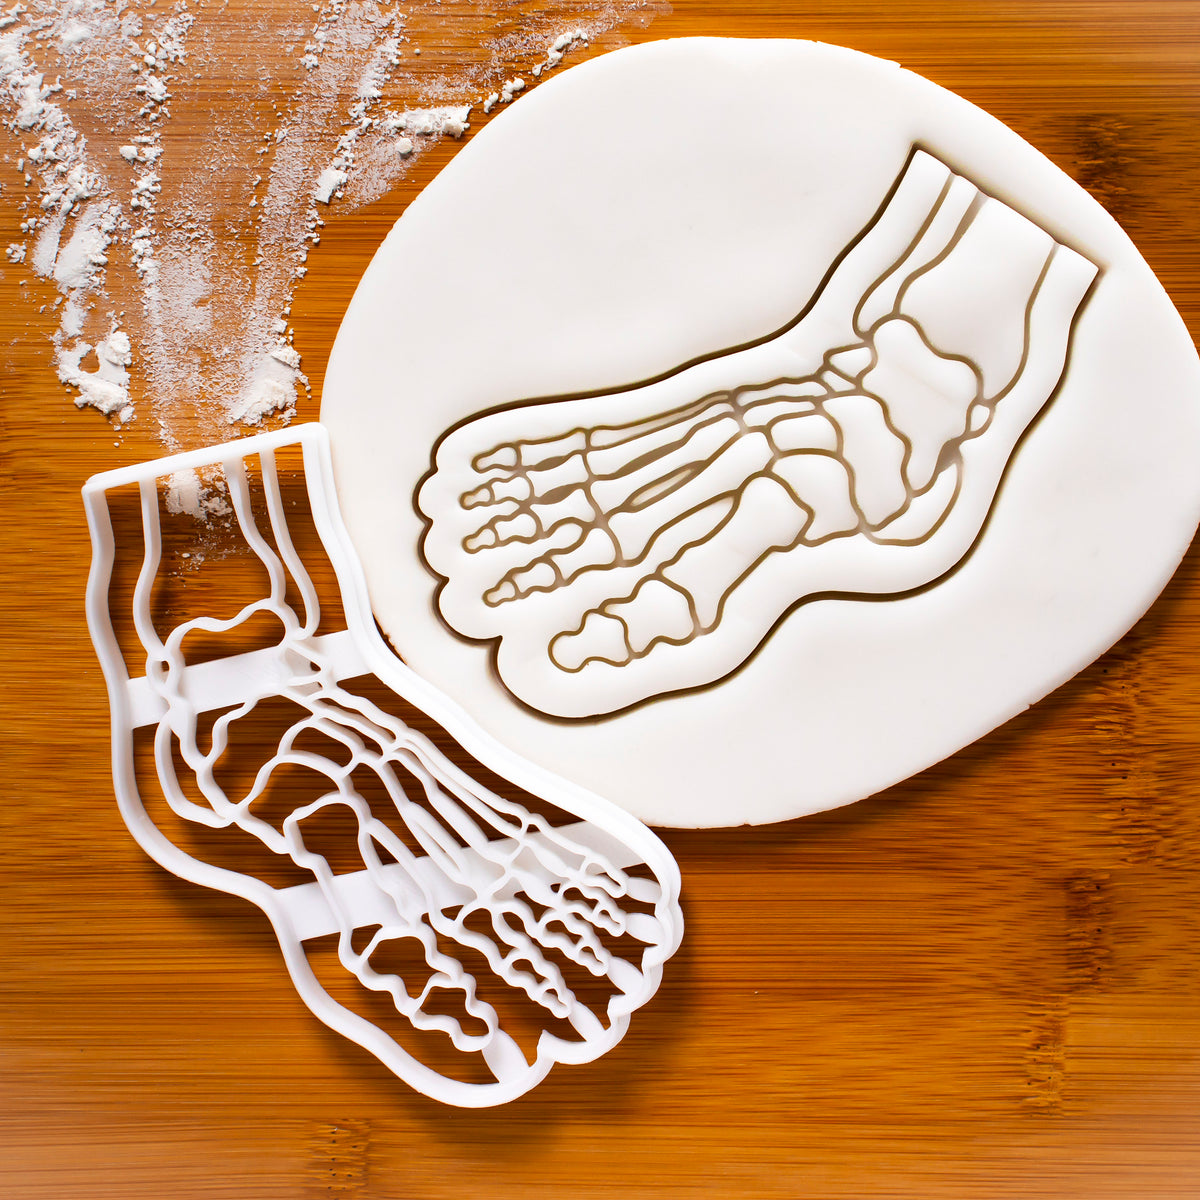 Anatomical Human Foot Cookie Cutter